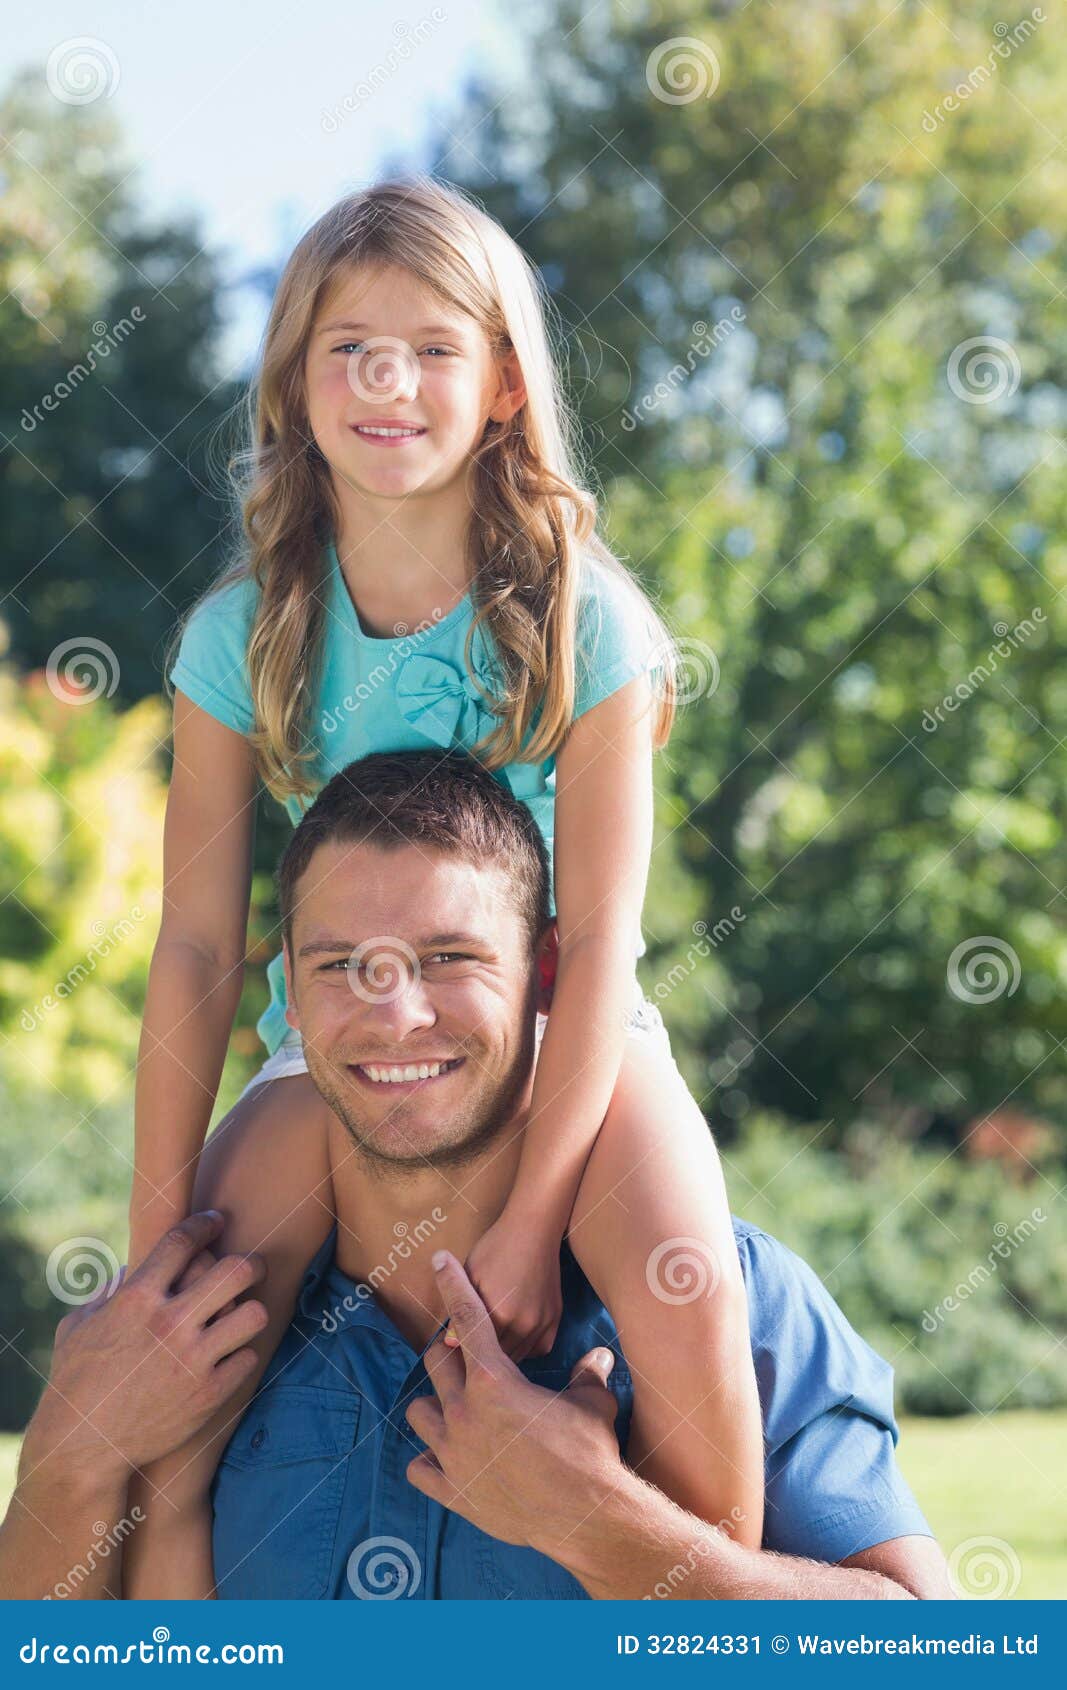 Dad young daughter